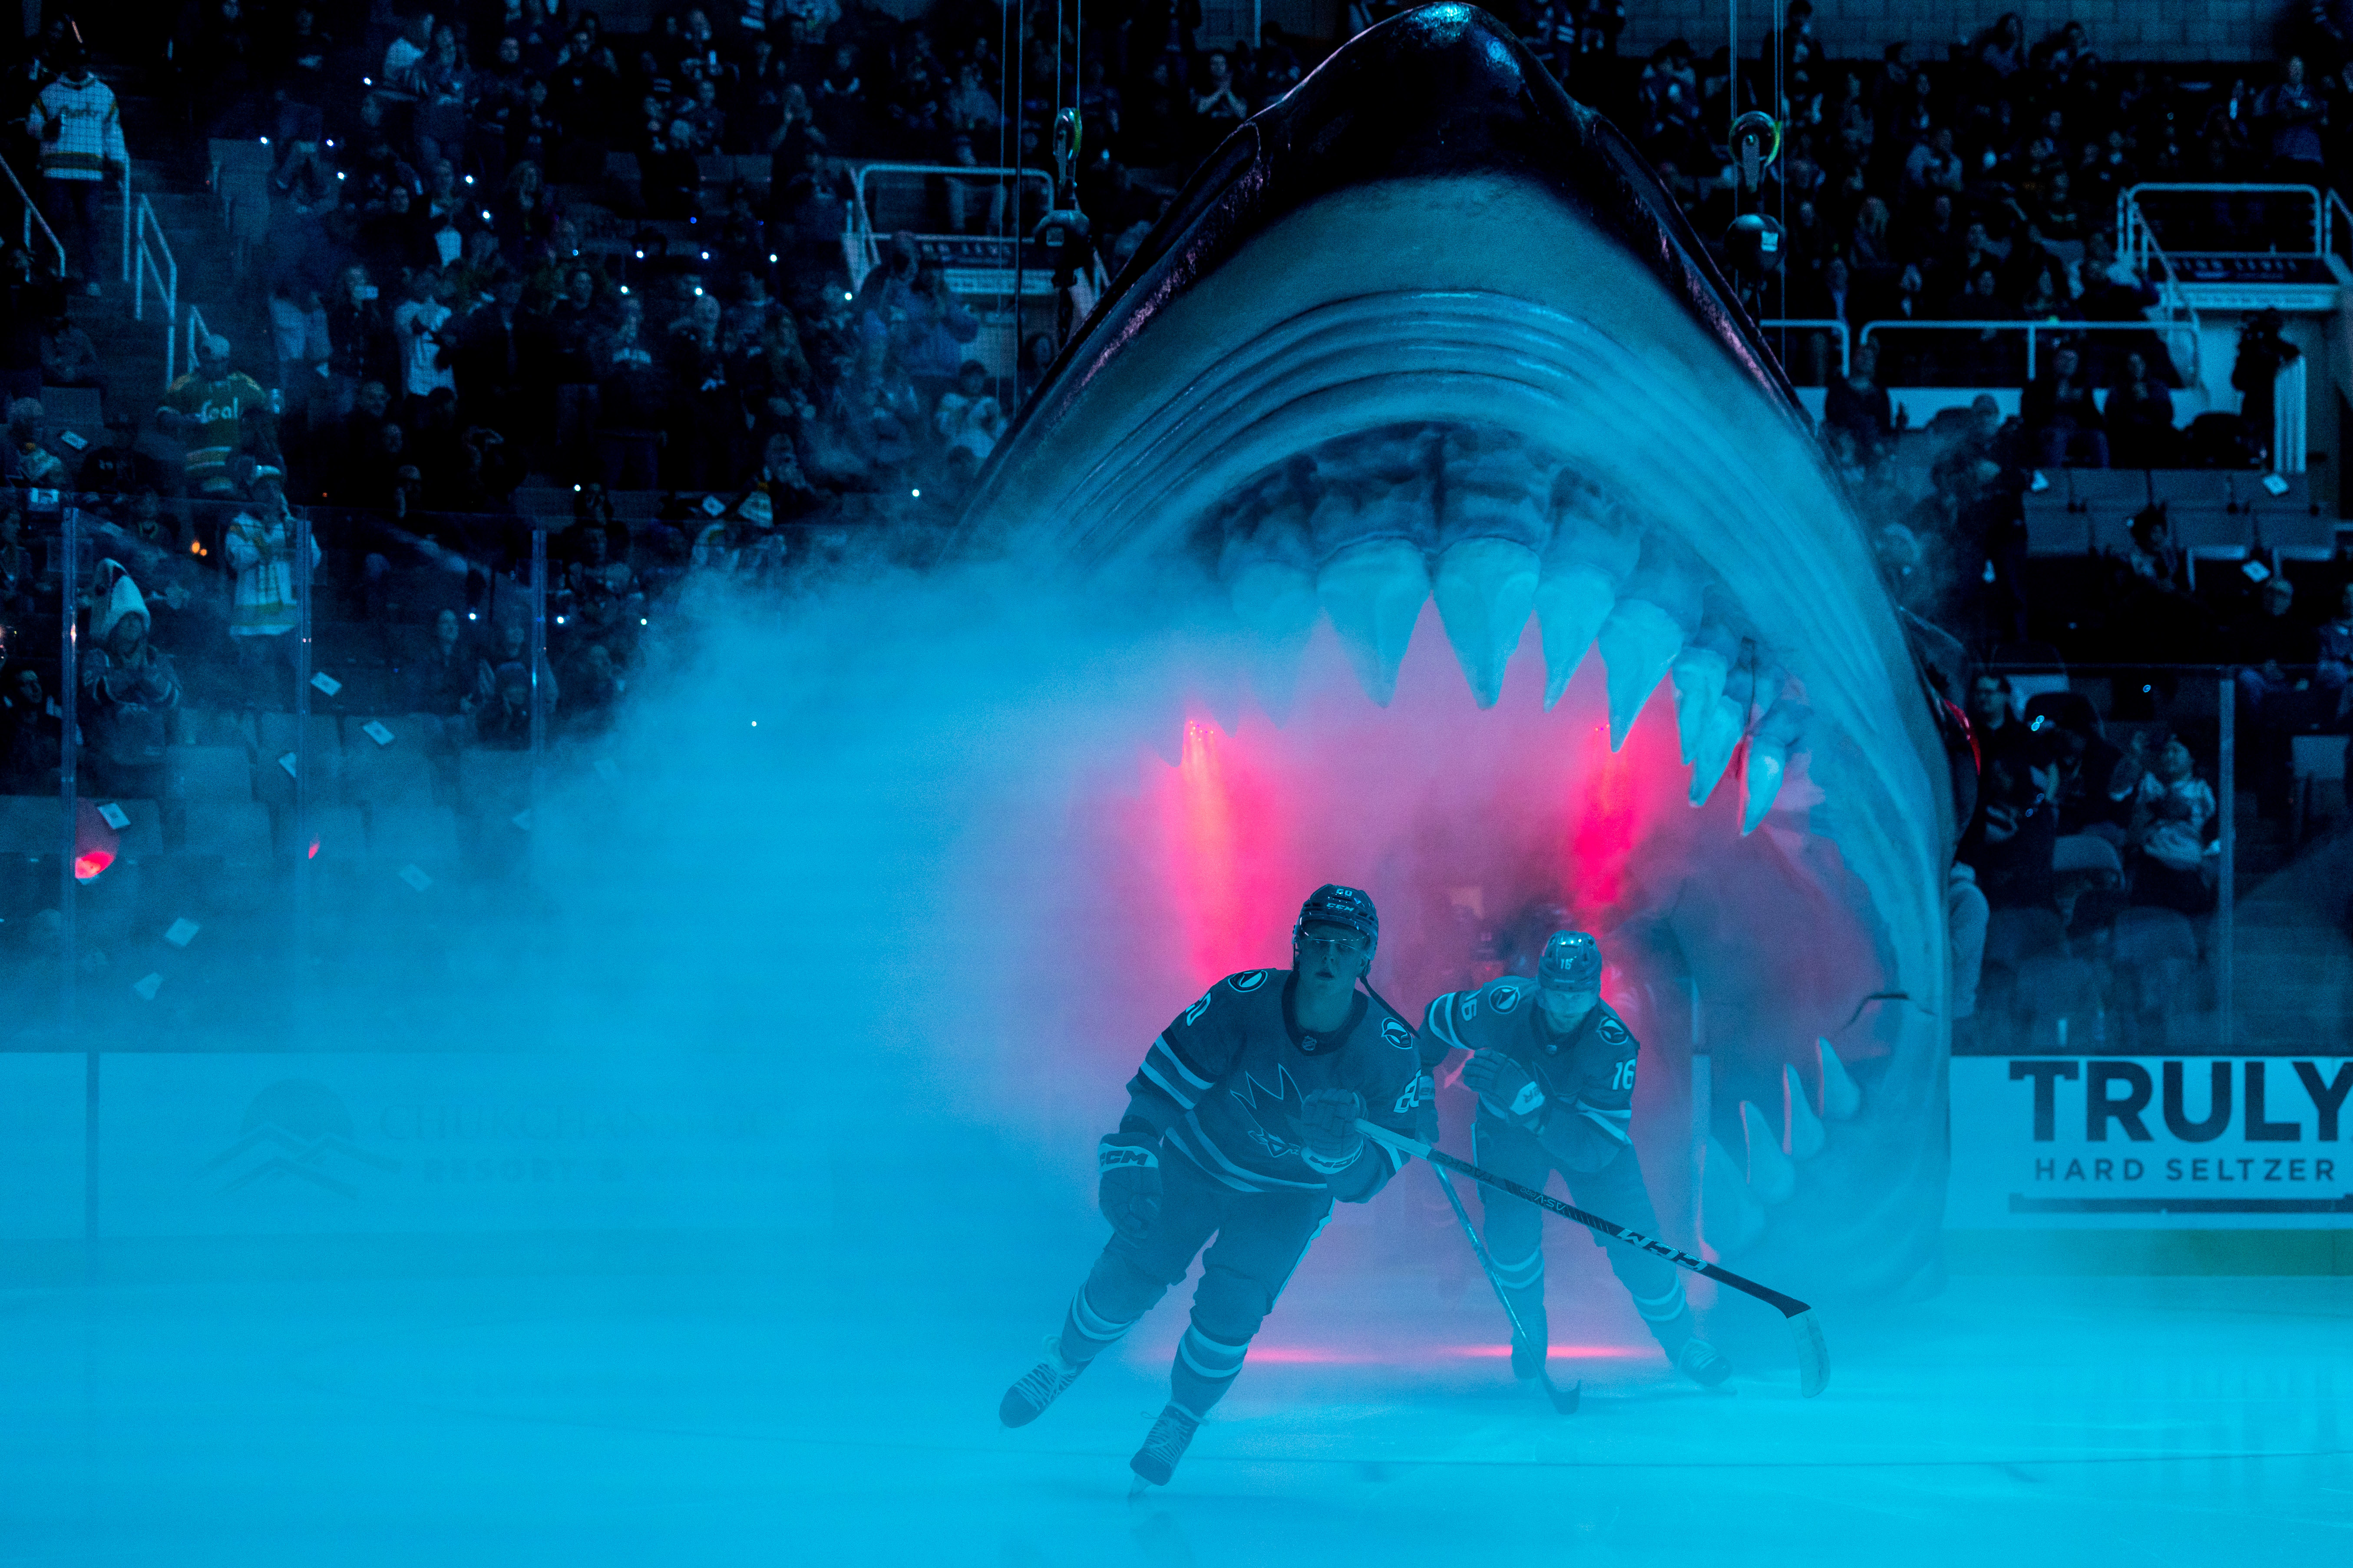 SOURCE: Sharks' New Teal Jerseys 'Should Be Debuting' in 2022-23